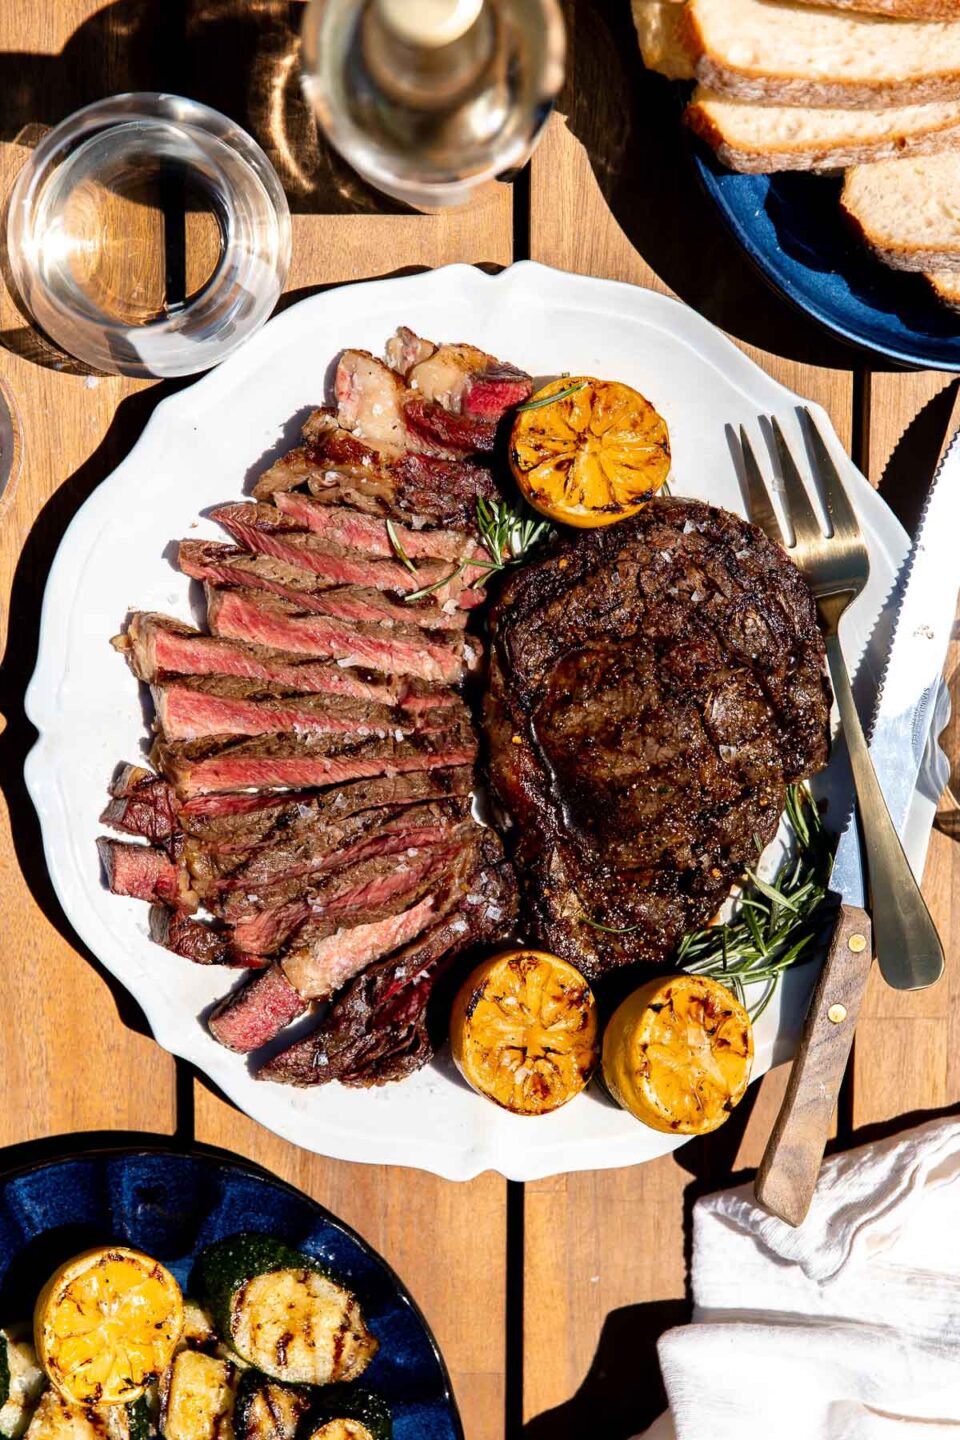 A single grilled whole Tuscan steak rests atop a white serving platter surround by char-grilled lemons, fresh rosemary, thinly sliced Tuscan steak, a steak knife, and a gold serving fork. The platter sits atop a wood dining table and is surrounded by a bottle of white wine, a glass of white wine, a white linen napkin, and two dark blue ceramic plates filled with char-grilled lemons and bread respectively.